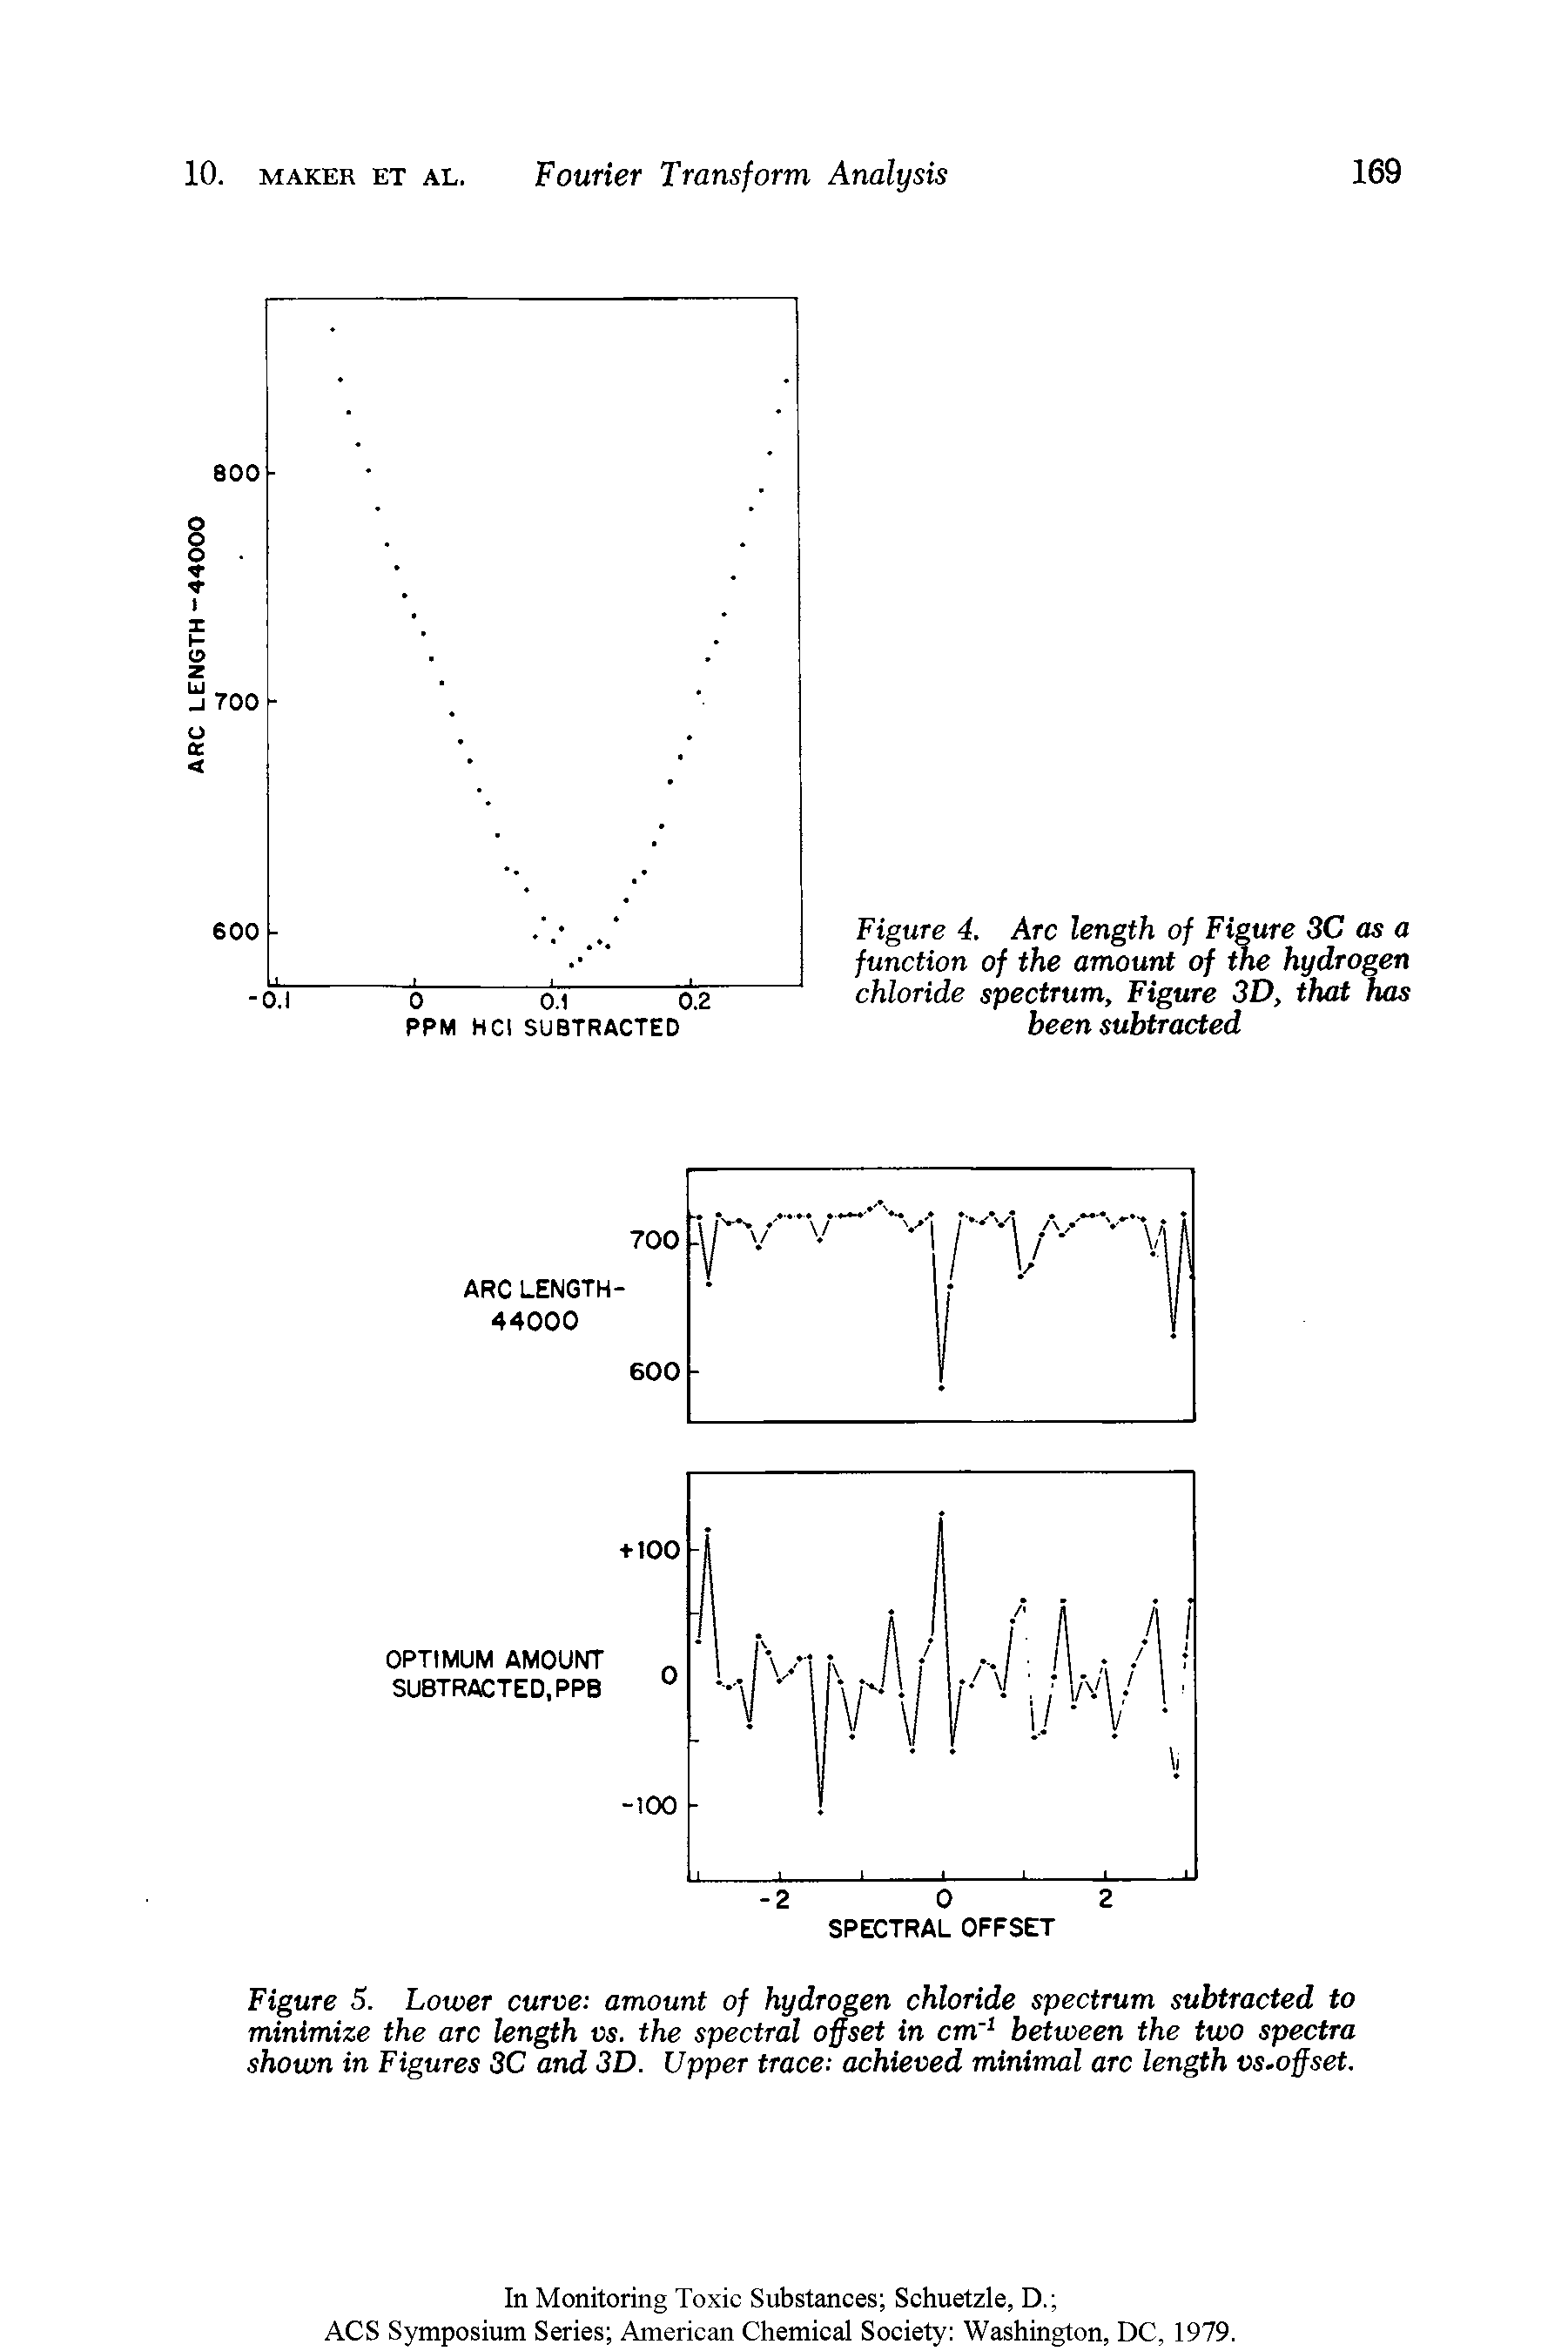 Figure 5. Lower curve amount of hydrogen chloride spectrum subtracted to minimize the arc length vs. the spectral offset in cm between the two spectra shown in Figures 3C and 3D. Upper trace achieved minimal arc length vs.offset.